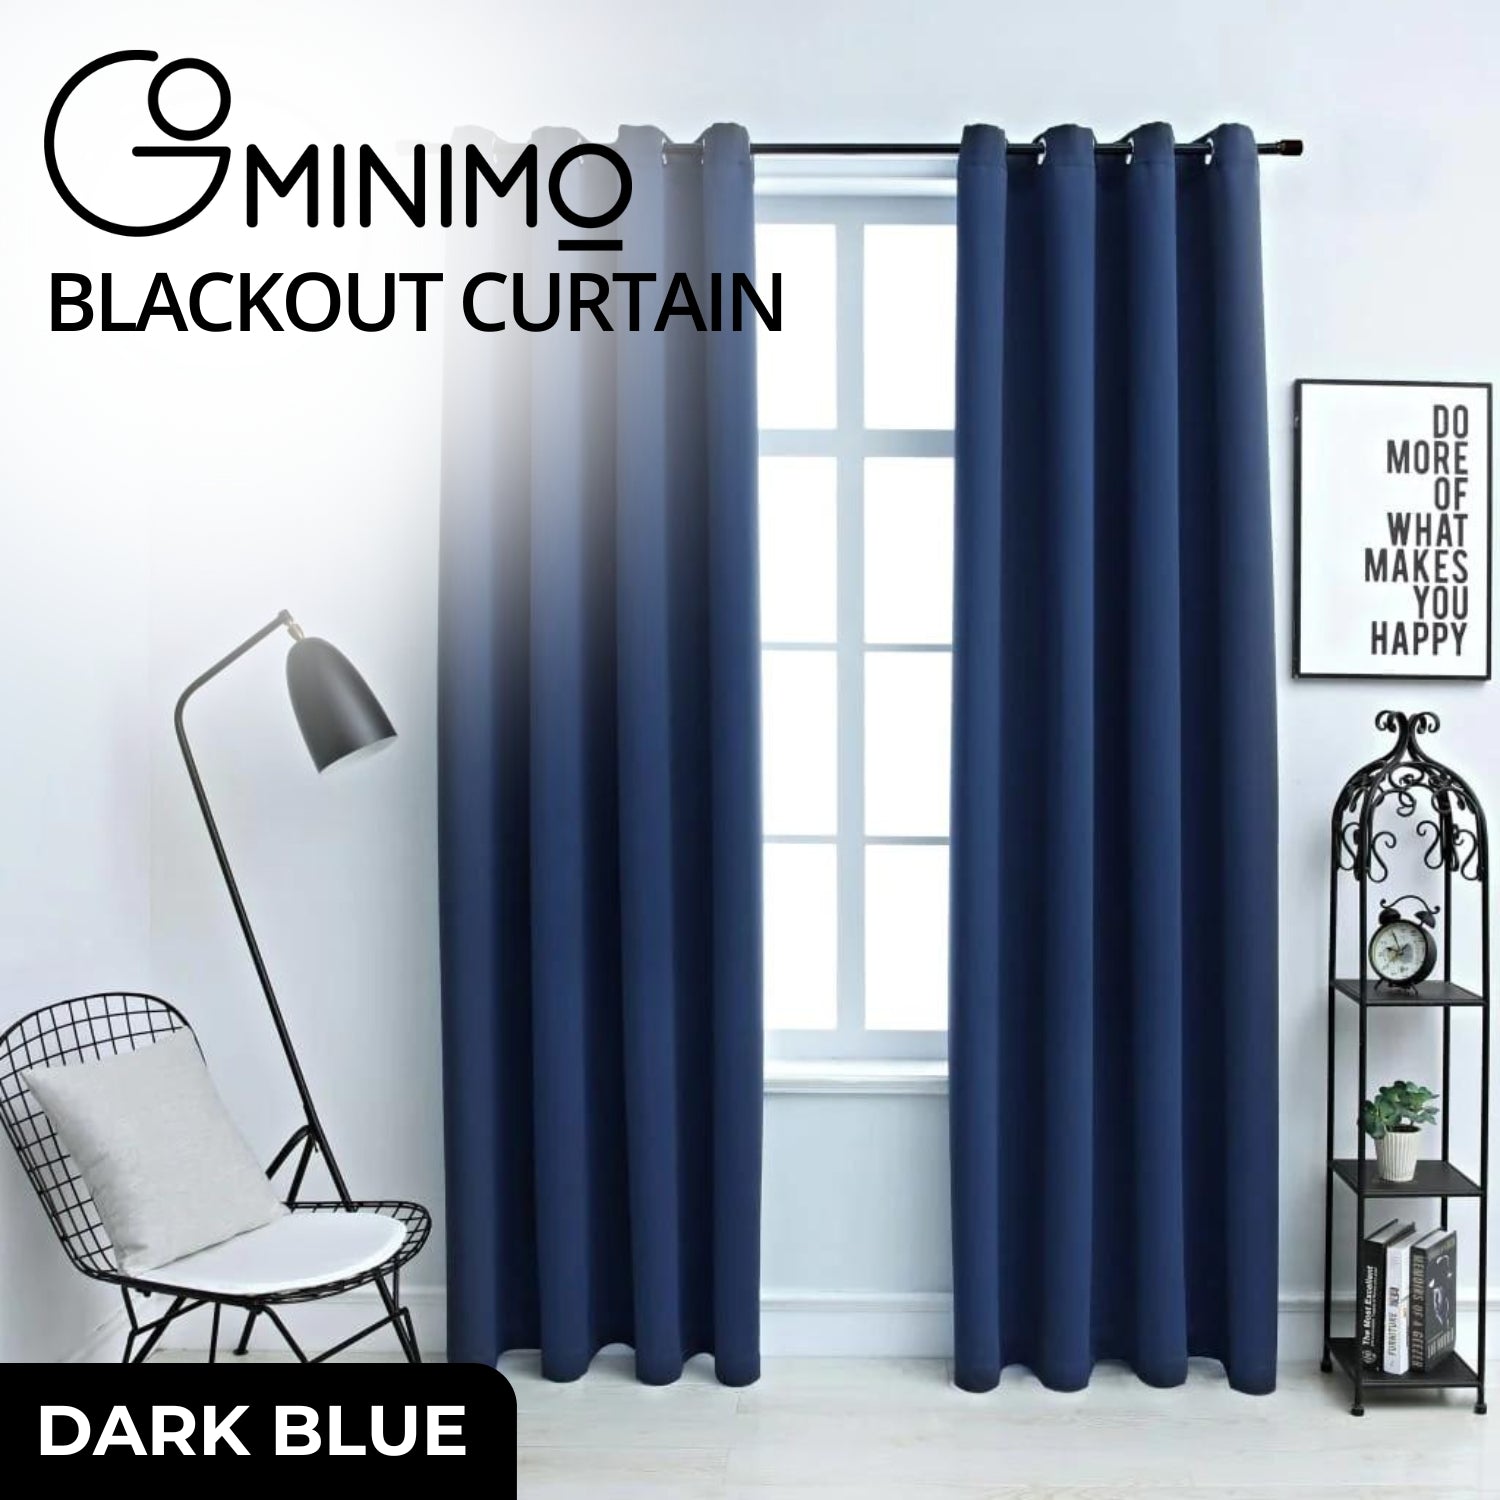 GOMINIMO Blackout Window Curtains for Thermal Insulated Room (Set of 2, W132cm x D243cm, Dark Blue) GO-CNB-112-MM - SILBERSHELL